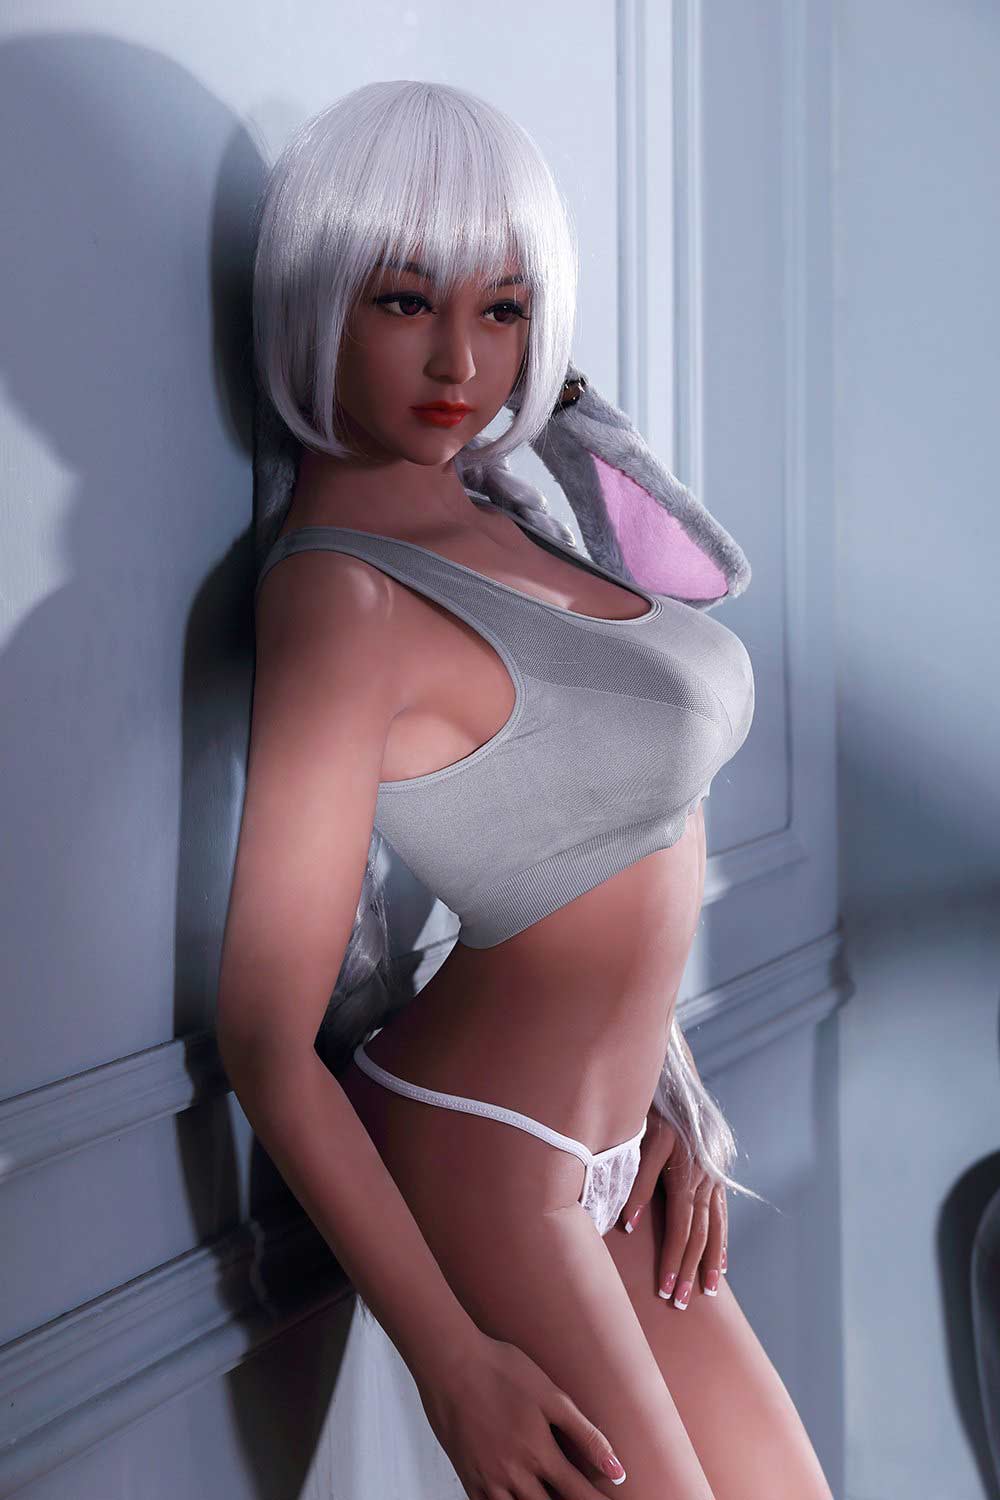 Sex doll with back against the wall